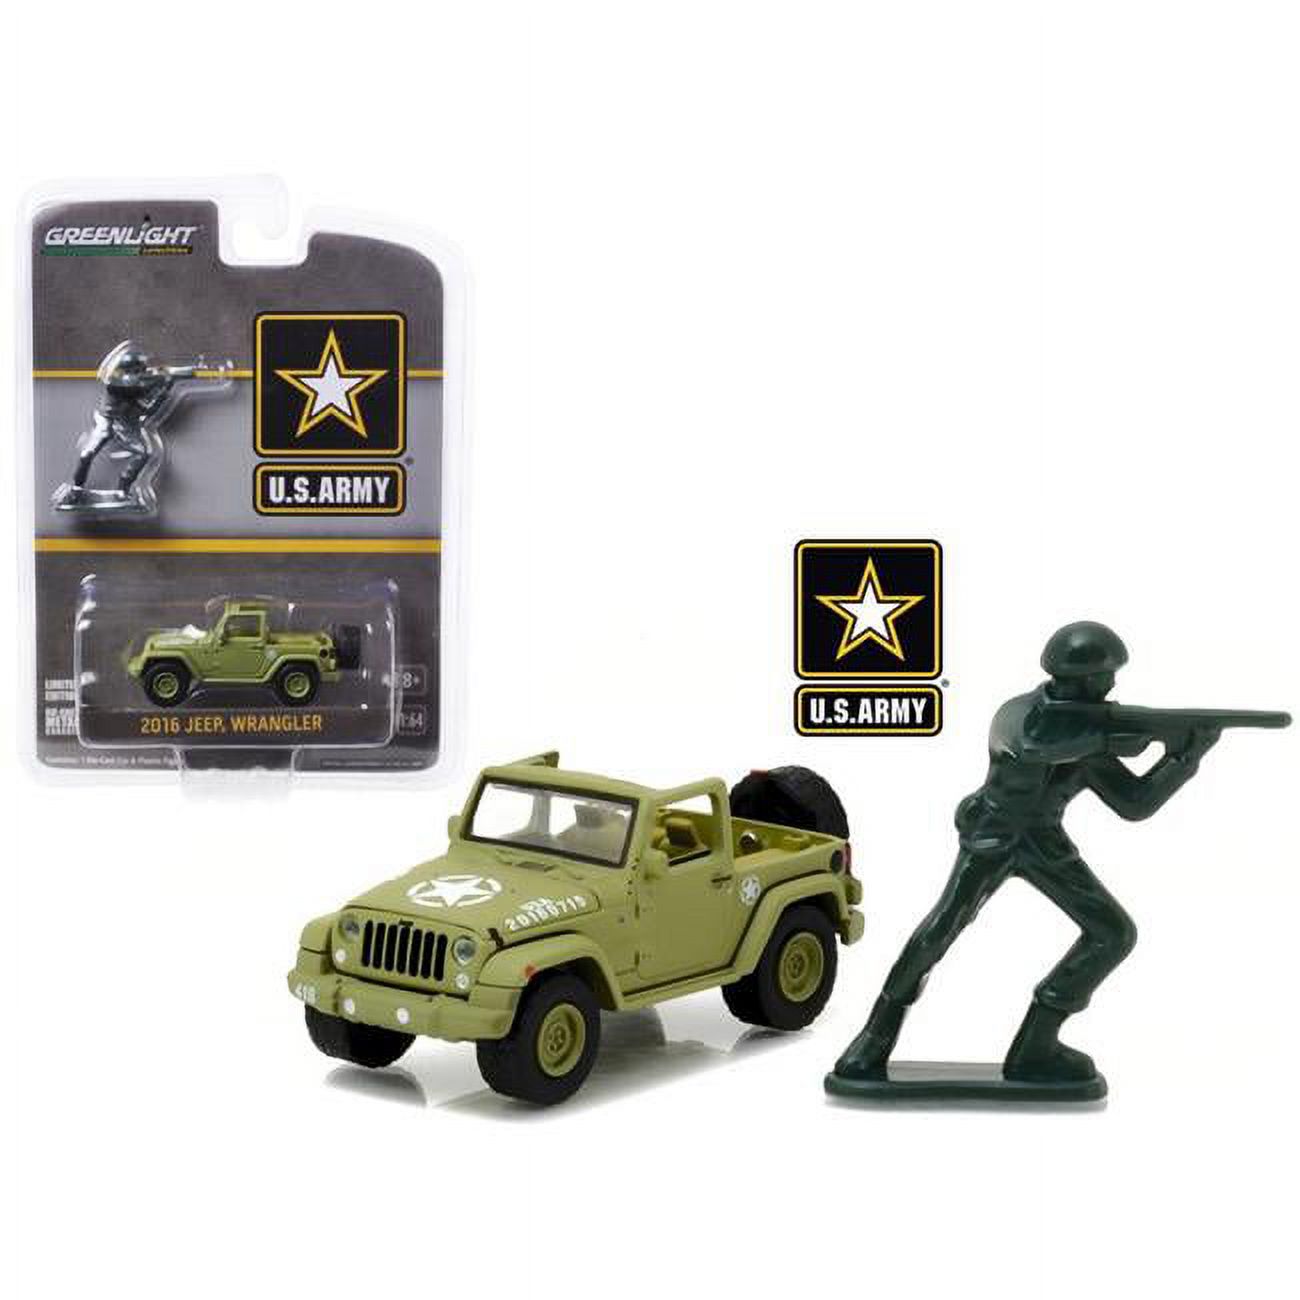 Greenlight 1:64 Hobby Exclusive 2016 Jeep Wrangler U.S Army With Soldier Figure - image 1 of 2